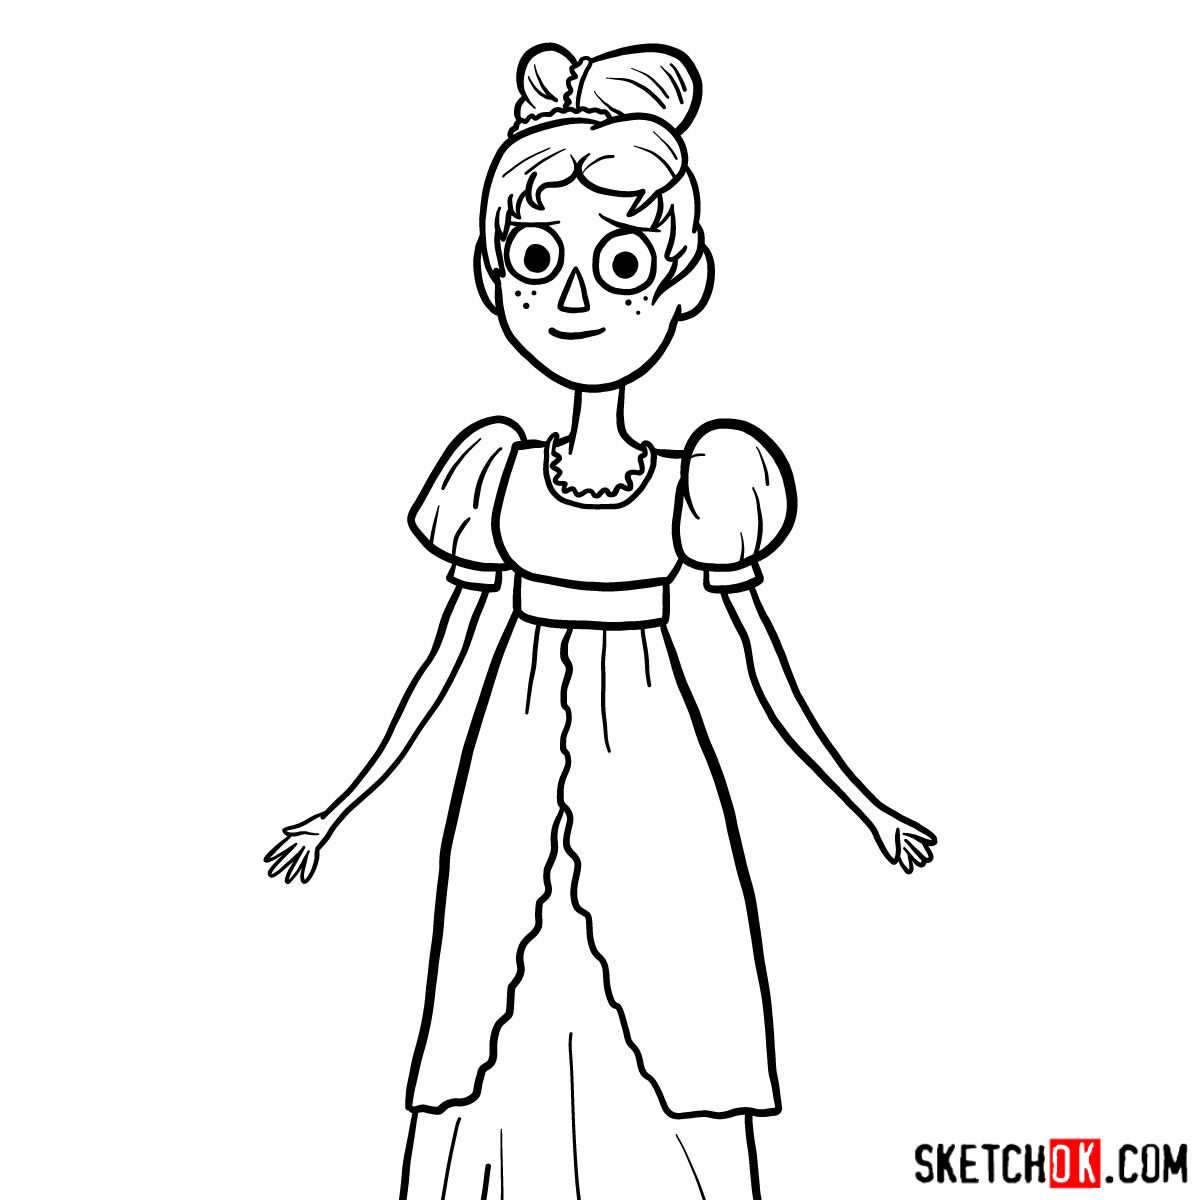 How to draw Beatrice (as a human) - step 10